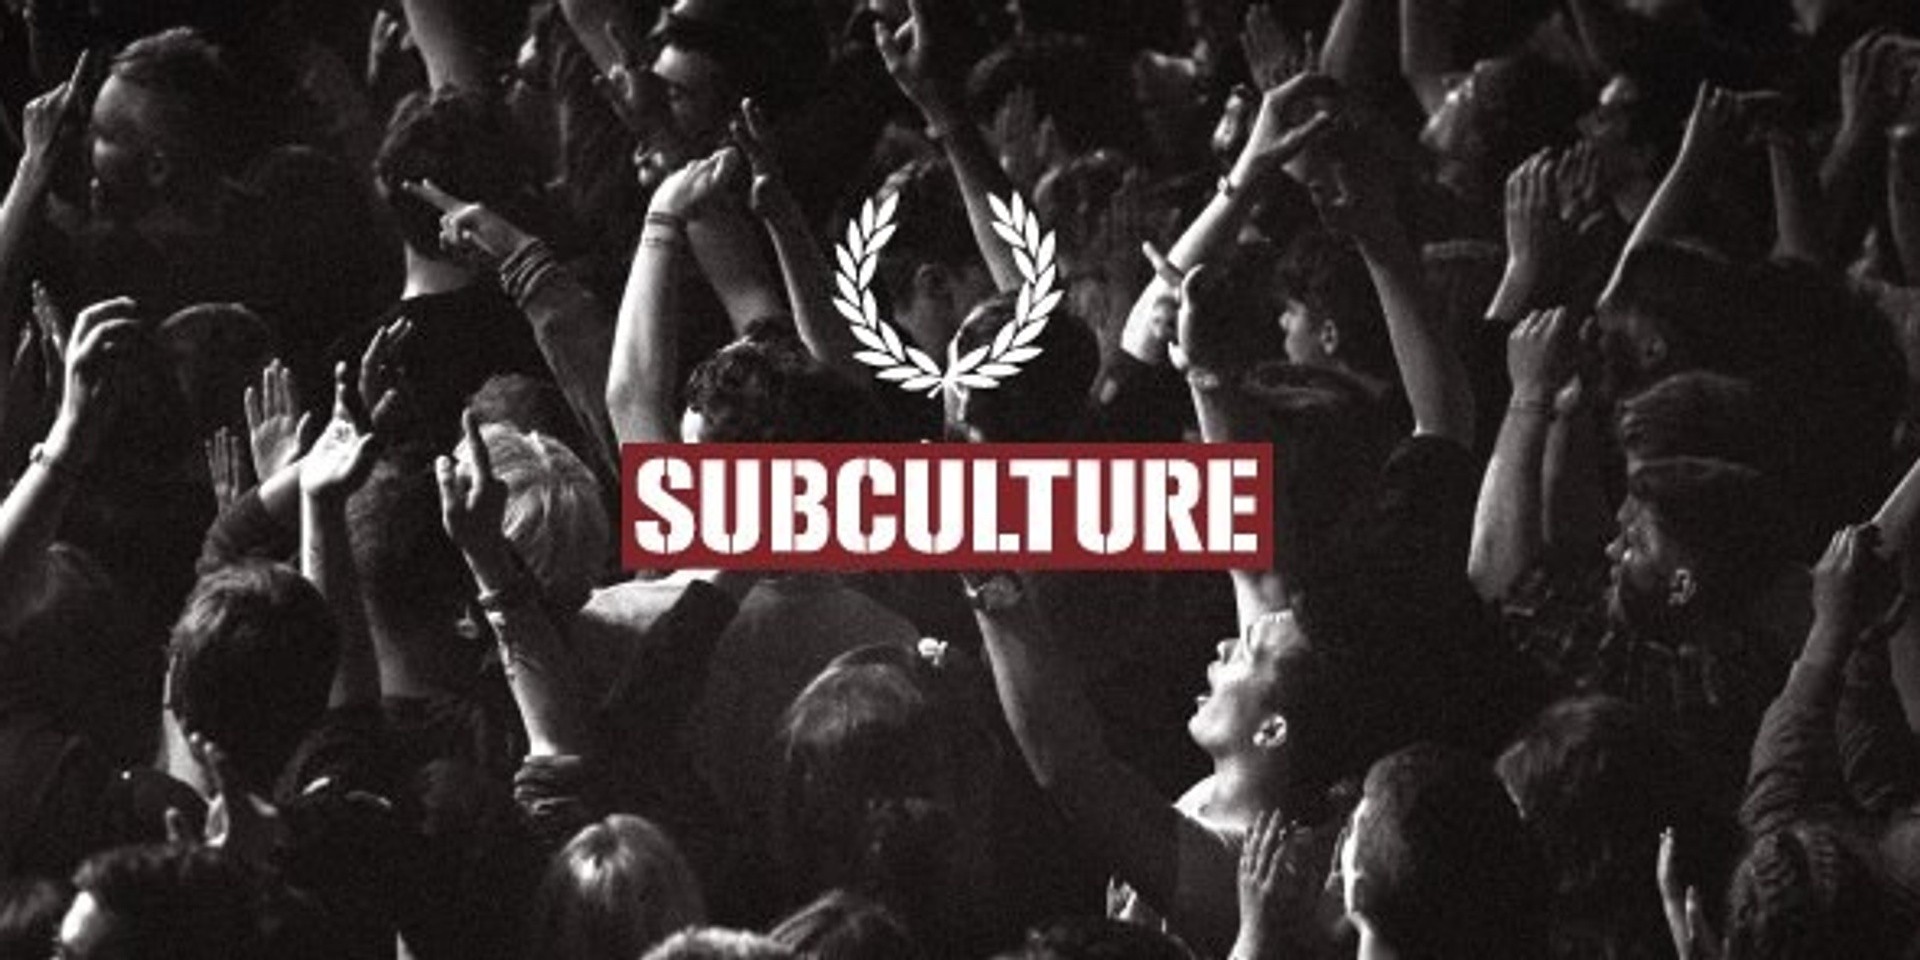 Fred Perry SubcultureLive returns after 3-year hiatus, headlined by Friendly Fires' Jack Savidge